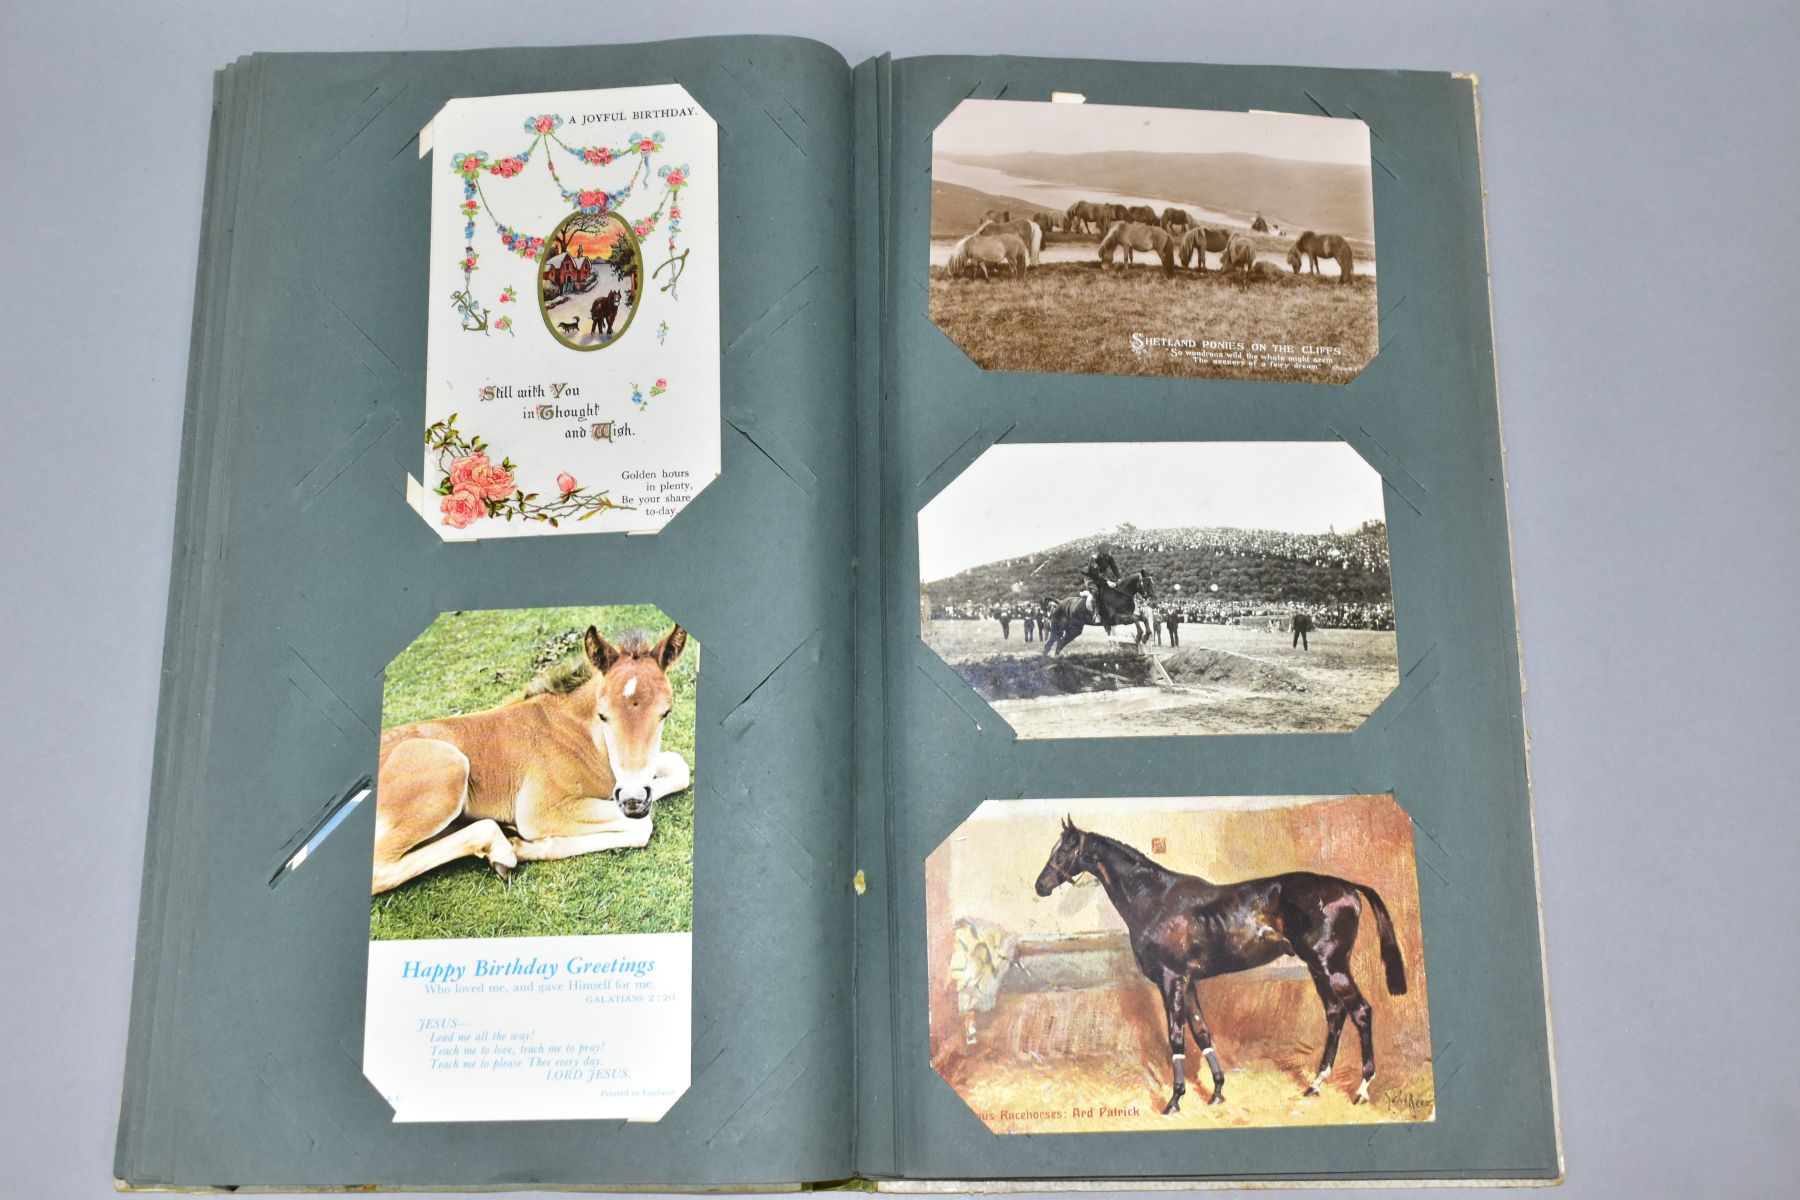 POSTCARDS, approximately 133 Postcards in one album of equine related cards, early-mid 20th century, - Image 8 of 8